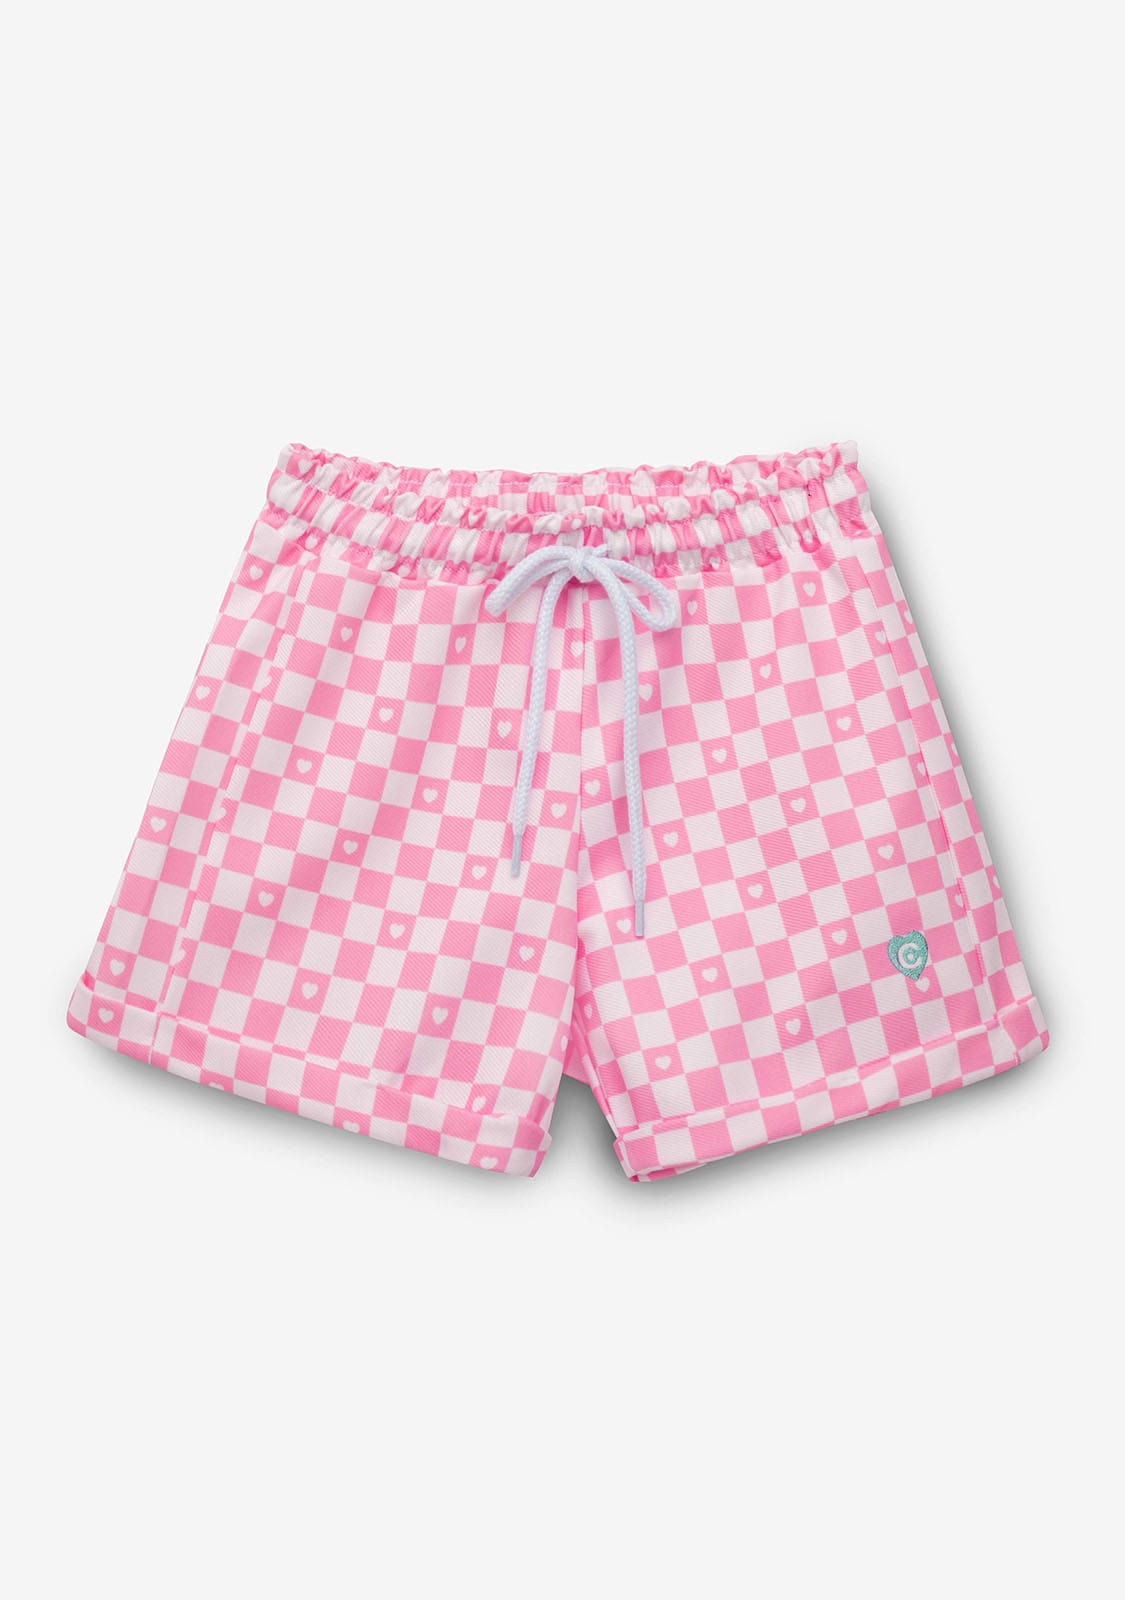 CONGUITOS TEXTIL Clothing Girl´s Pink Checkers Shorts